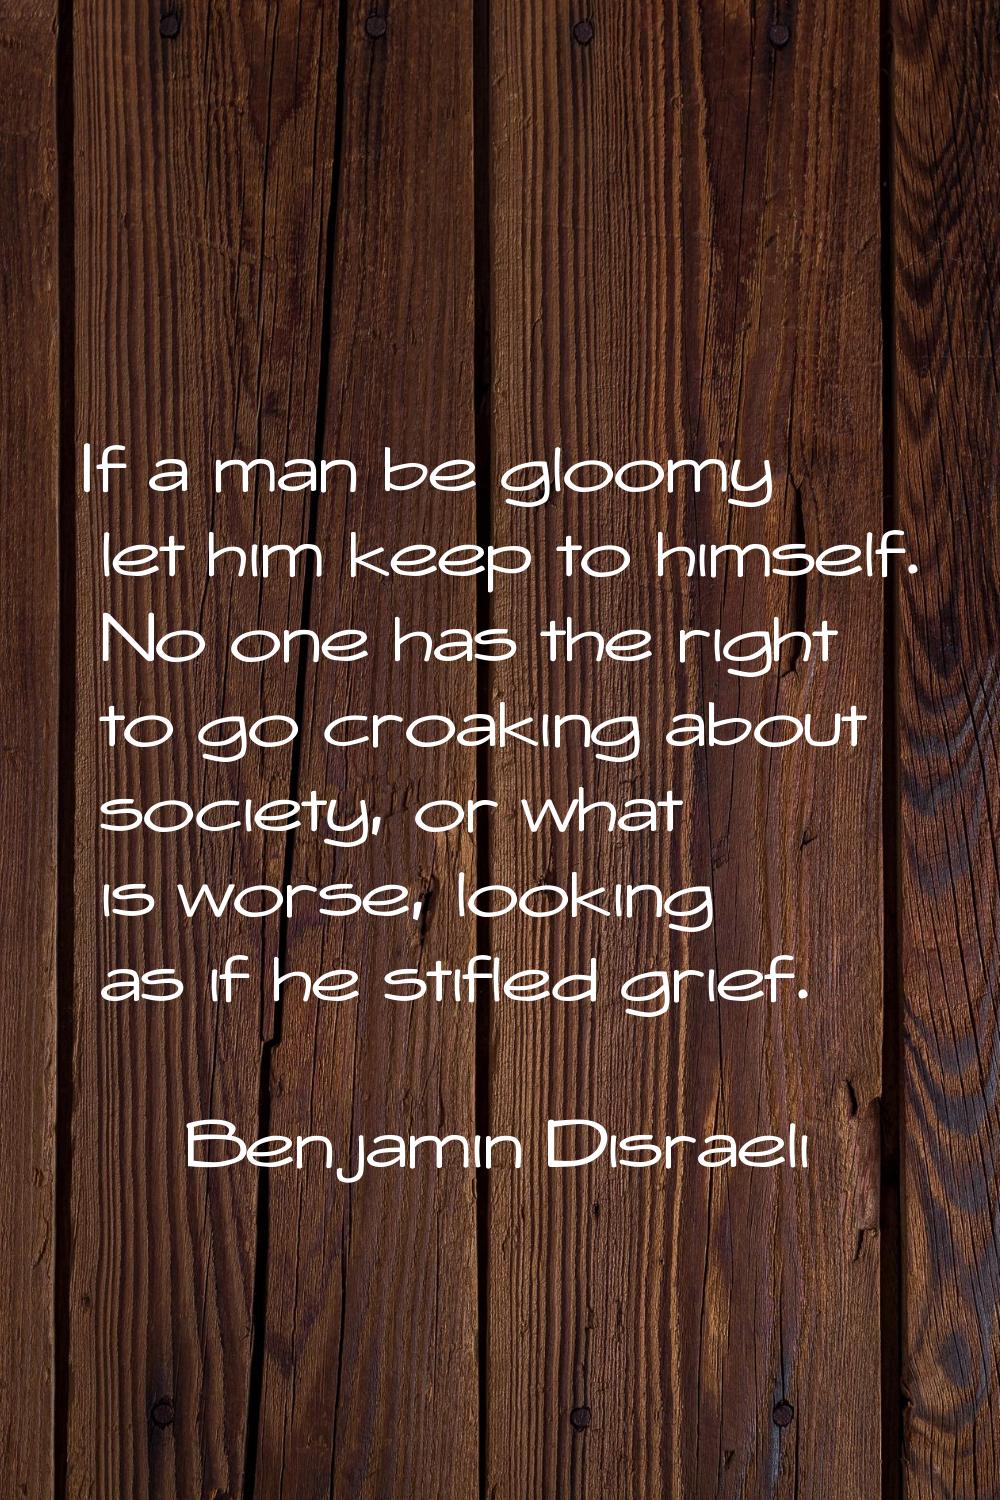 If a man be gloomy let him keep to himself. No one has the right to go croaking about society, or w